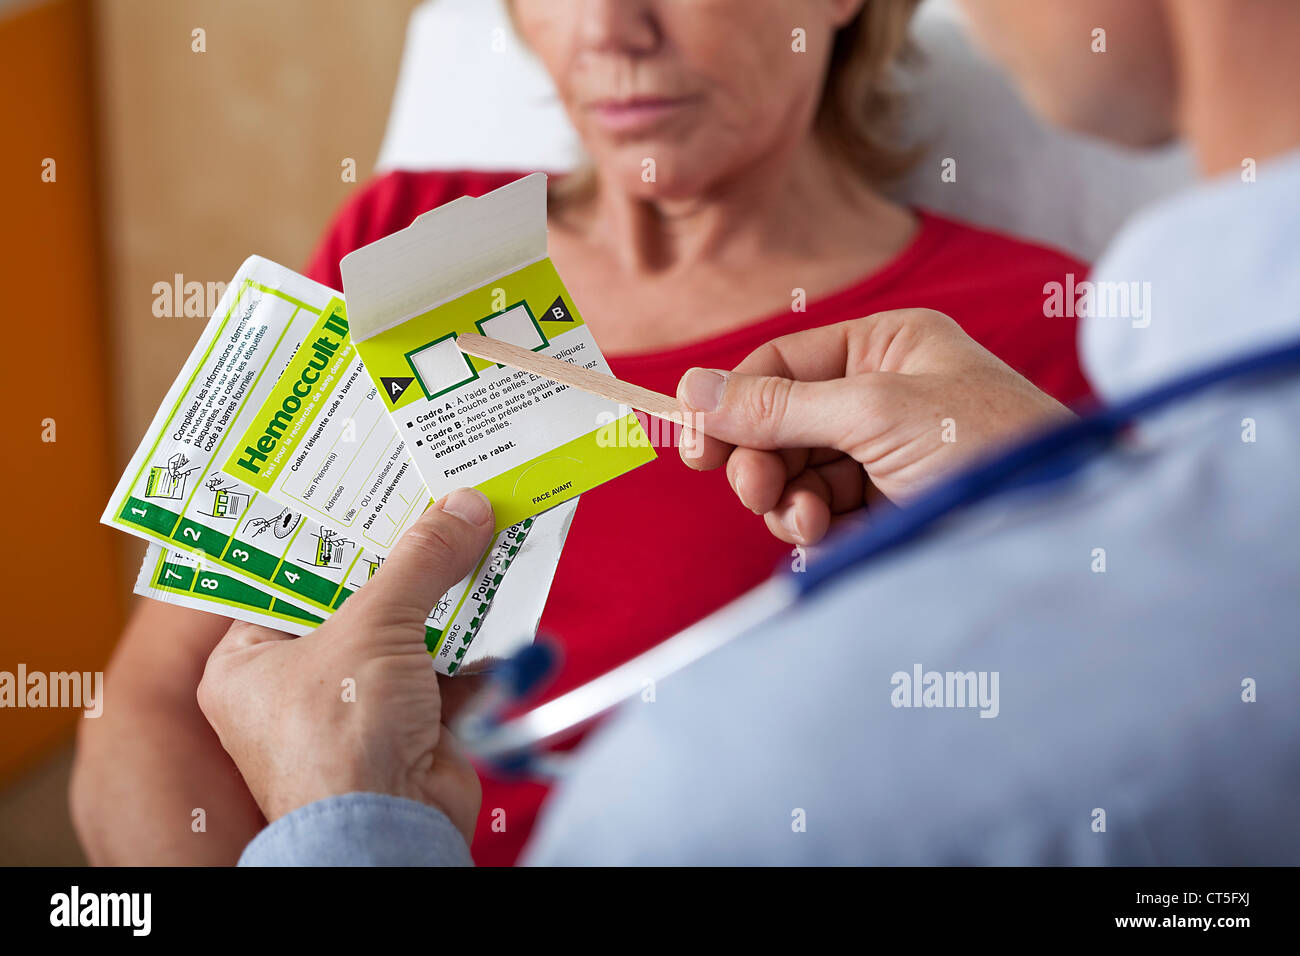 Patient Colon Exam High Resolution Stock Photography And Images Alamy